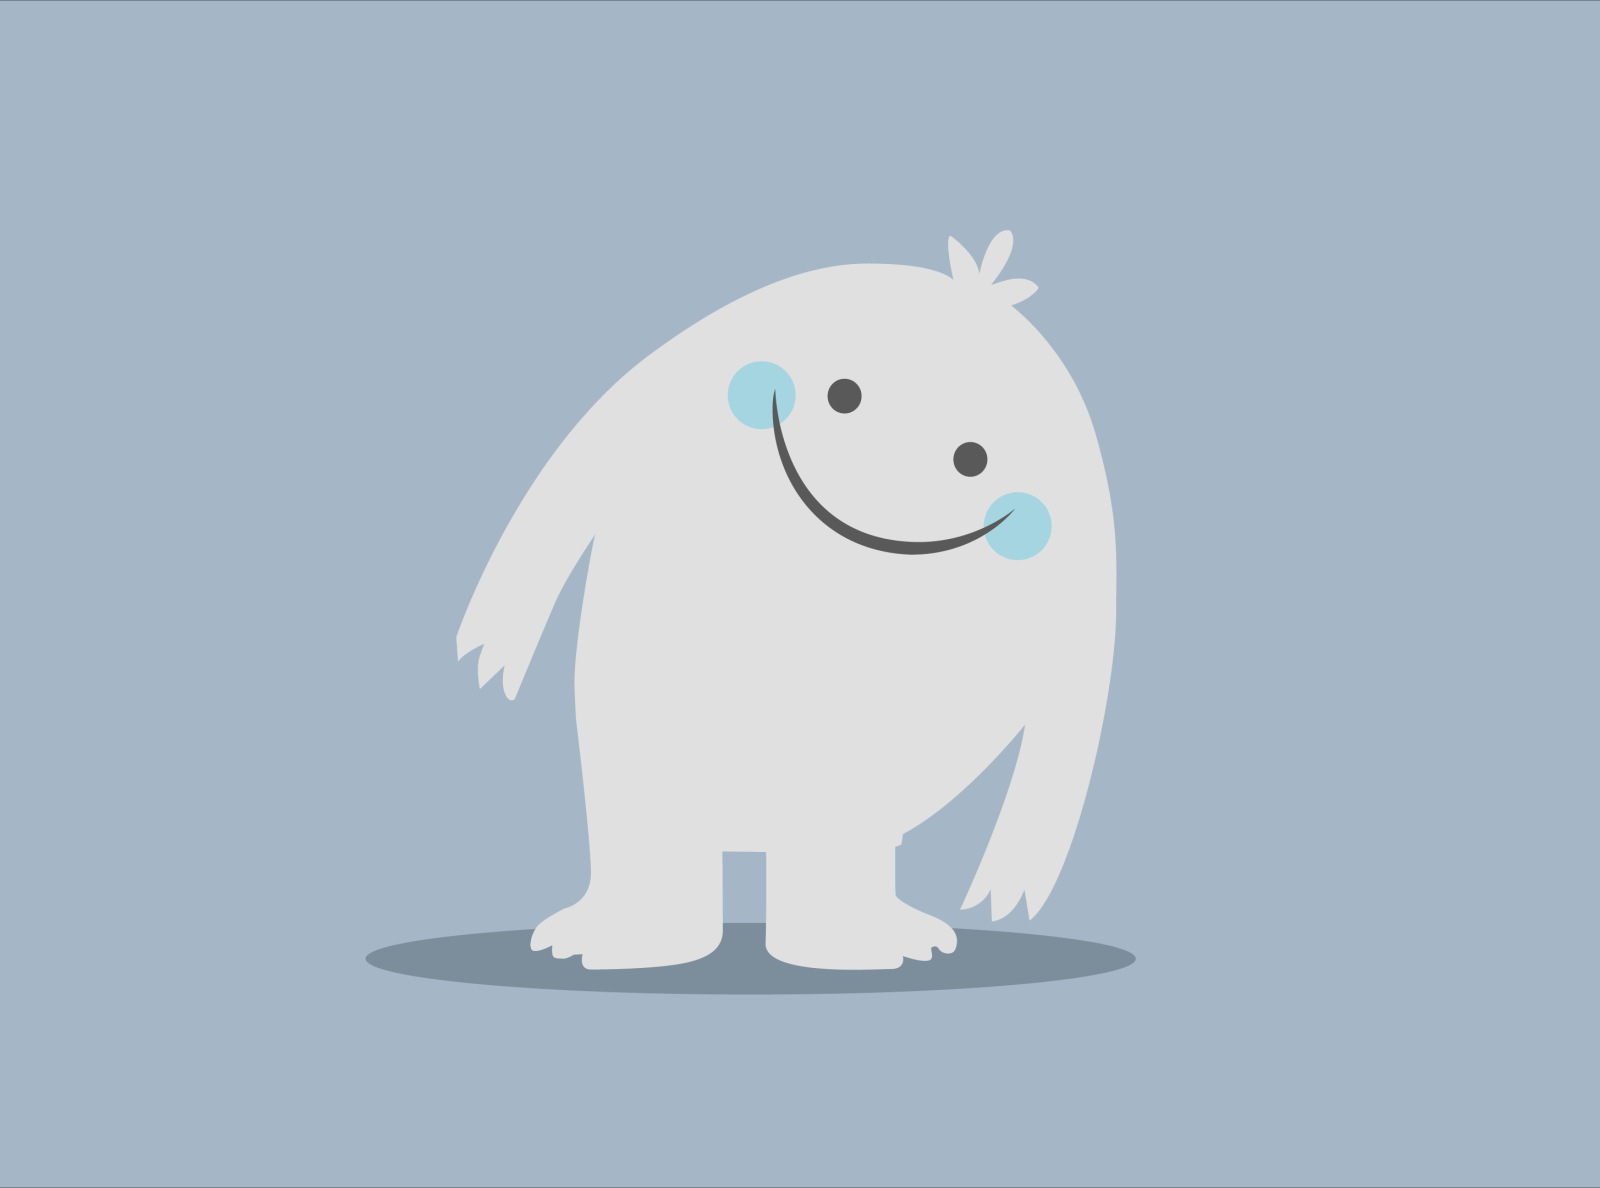 Remy the Yeti from Sago Mini by Craig Keller on Dribbble